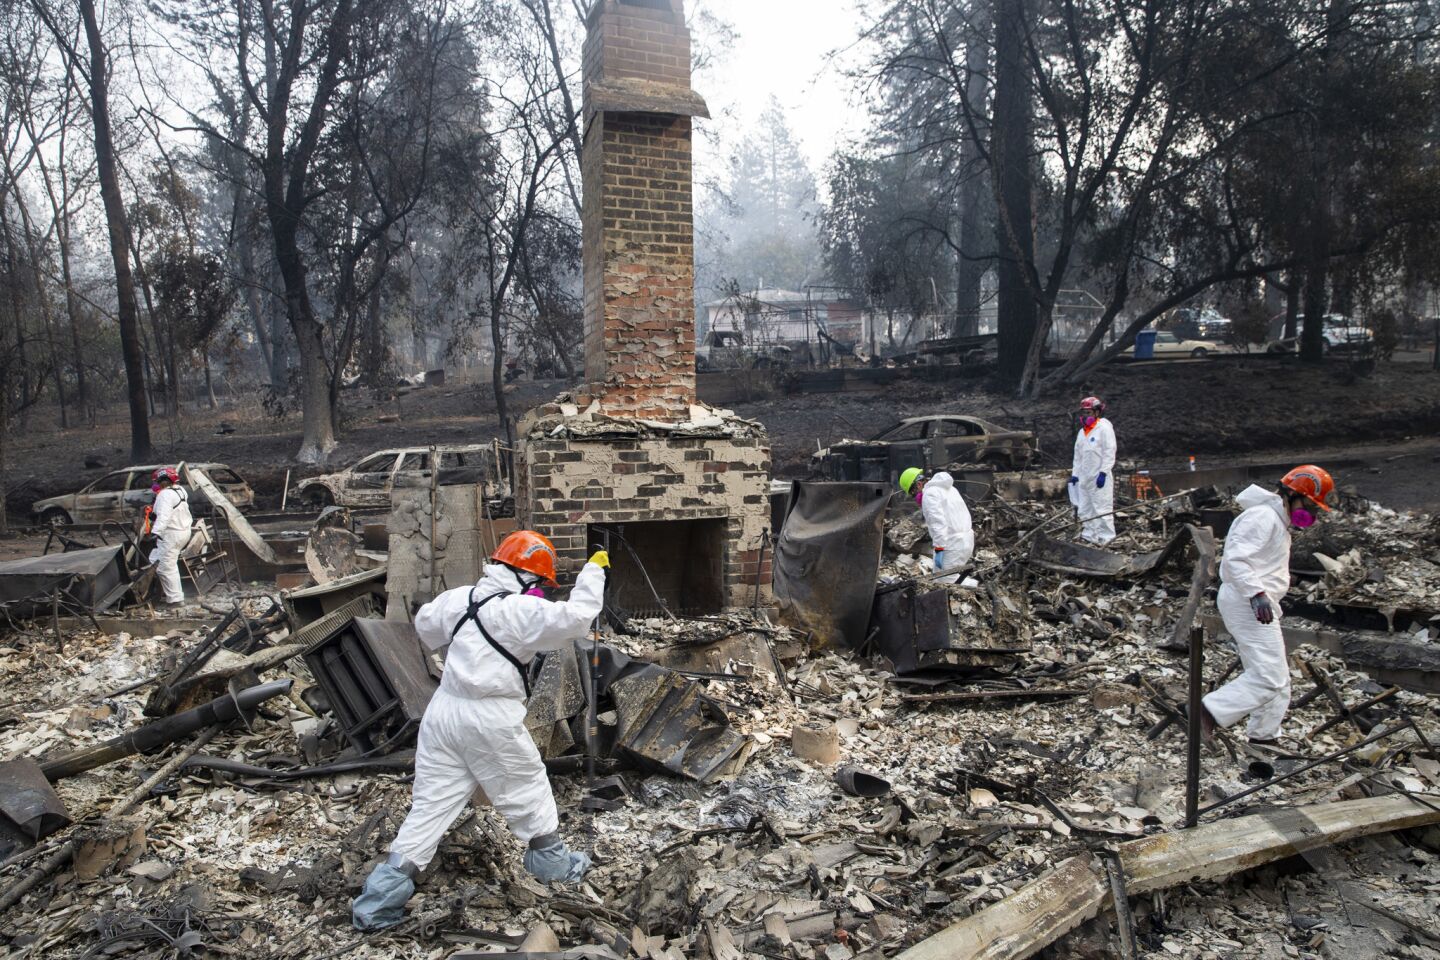 Search and rescue teams inspect the grounds of a house burned by the Camp Fire along Boquest Boulevard in Oroville, Calif.